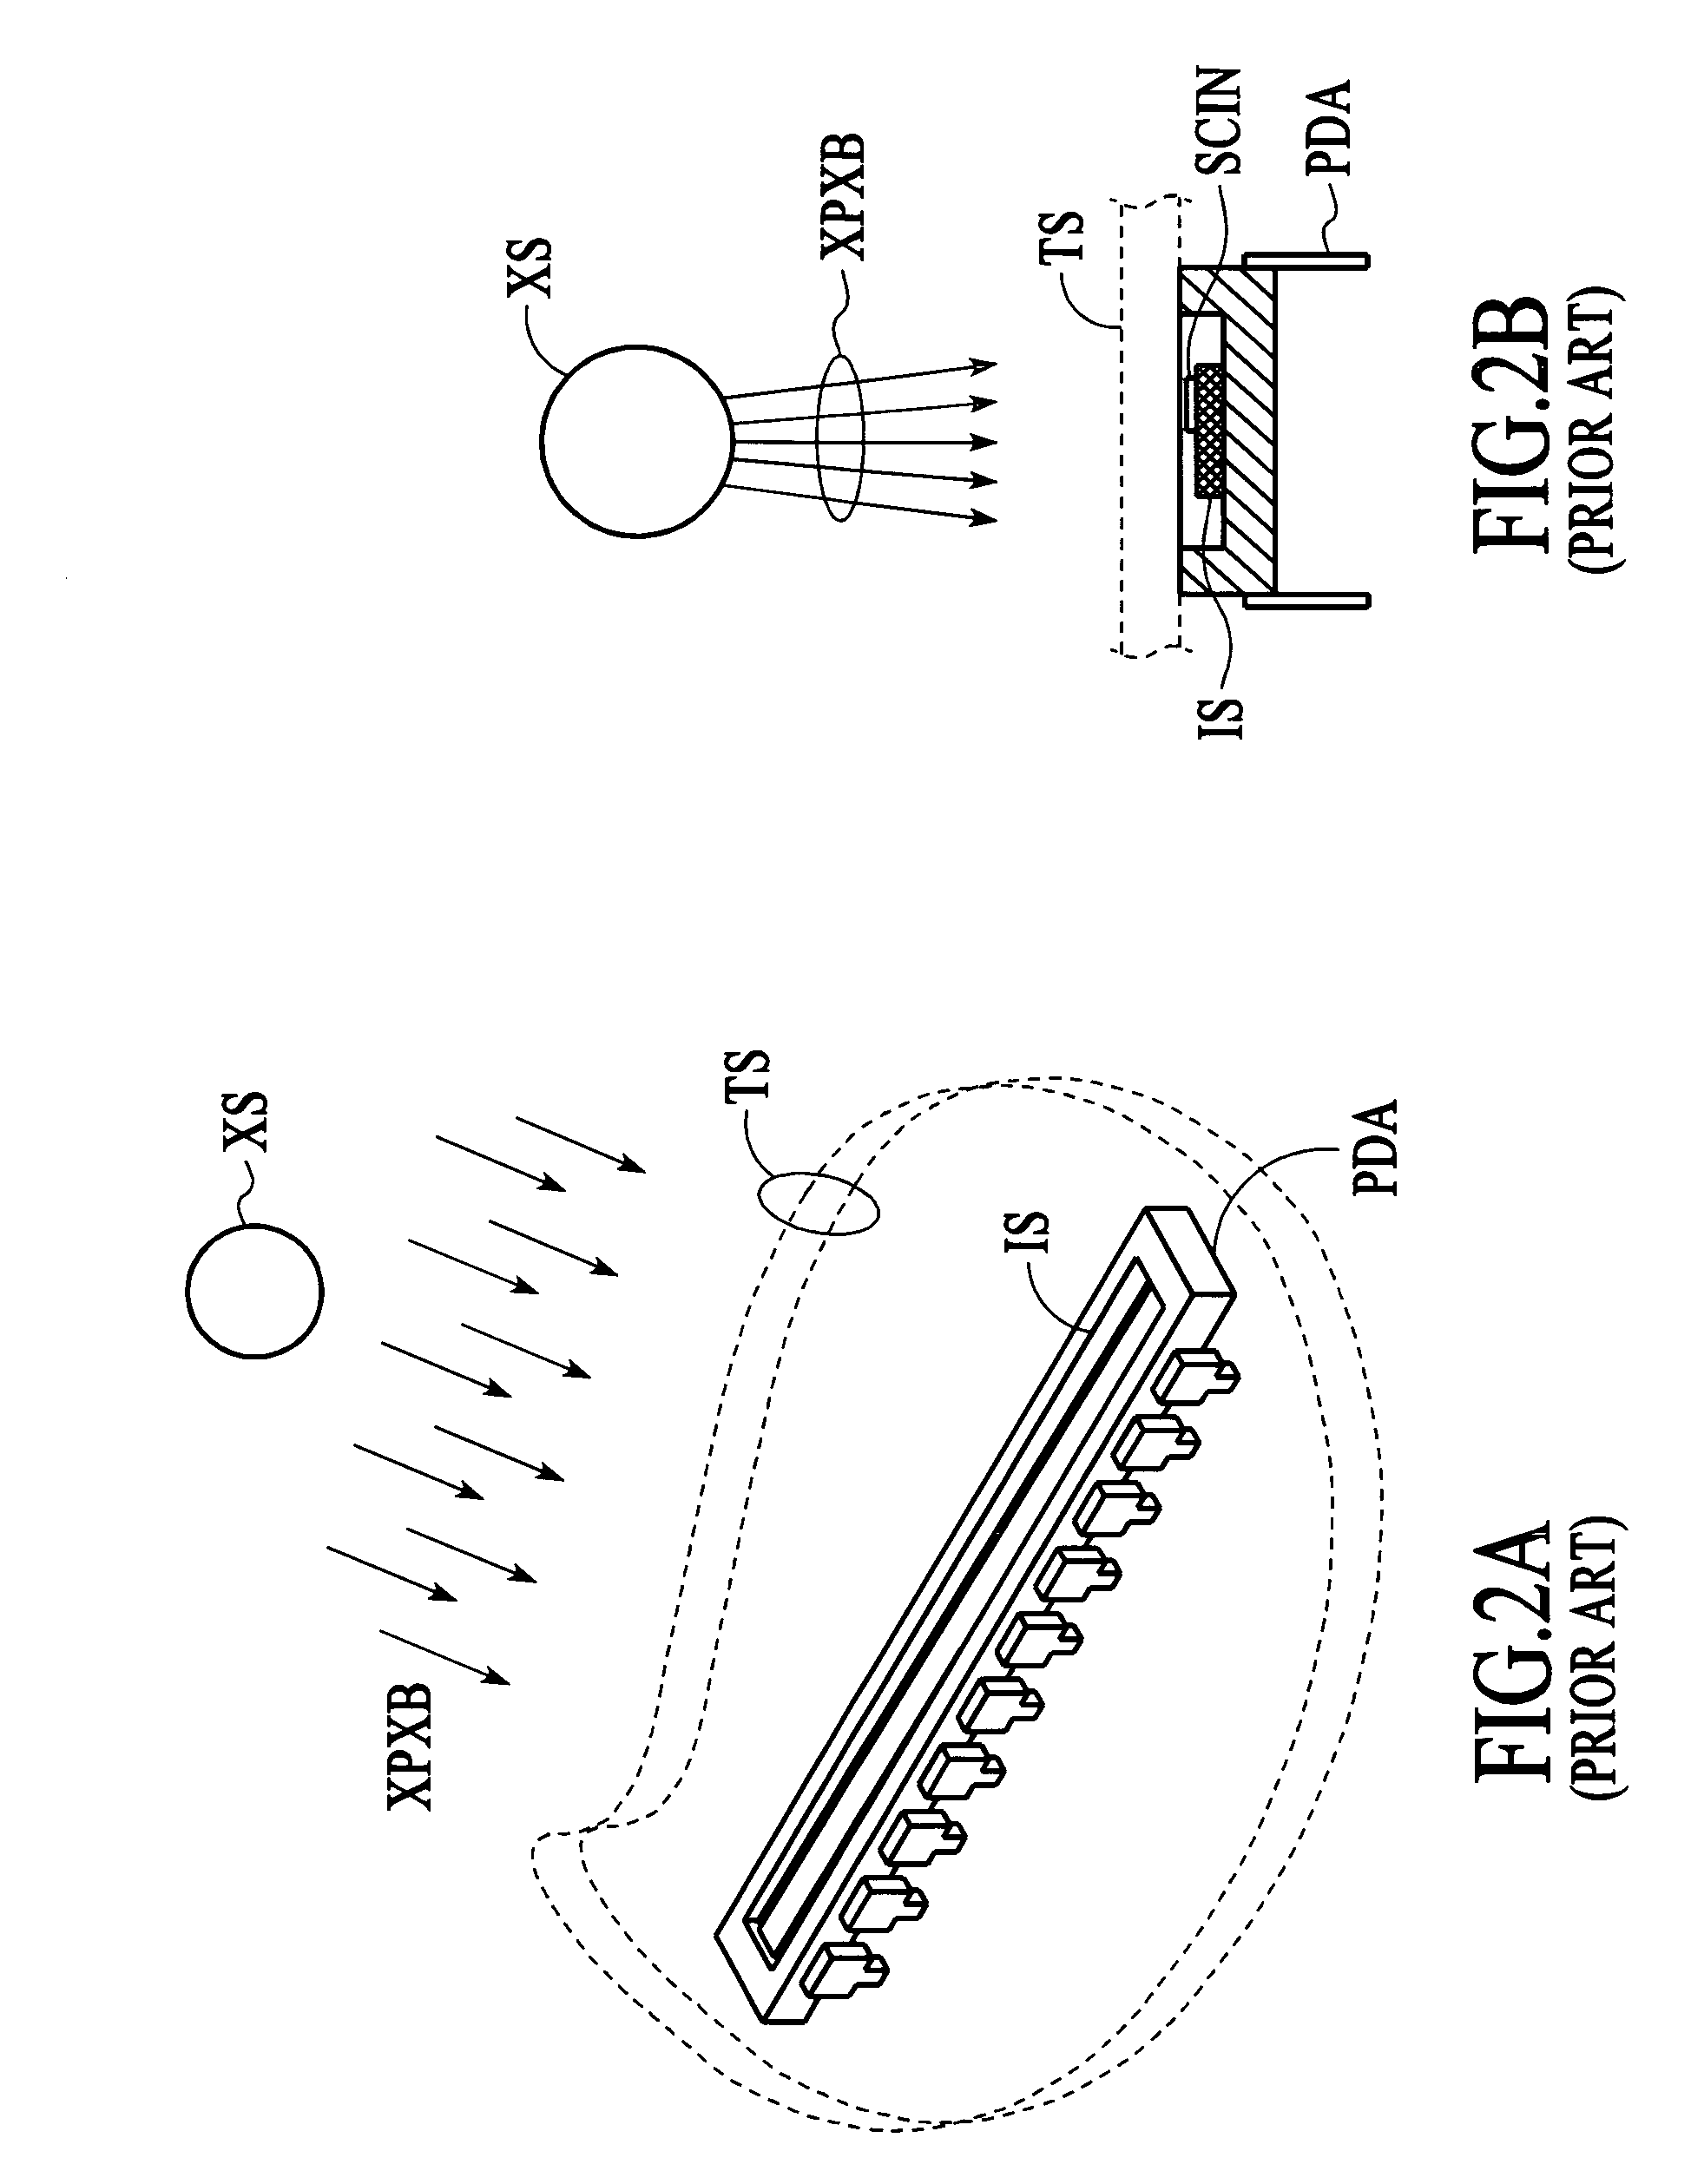 Linear X-ray detector using fiber optic face plate to alter optical path